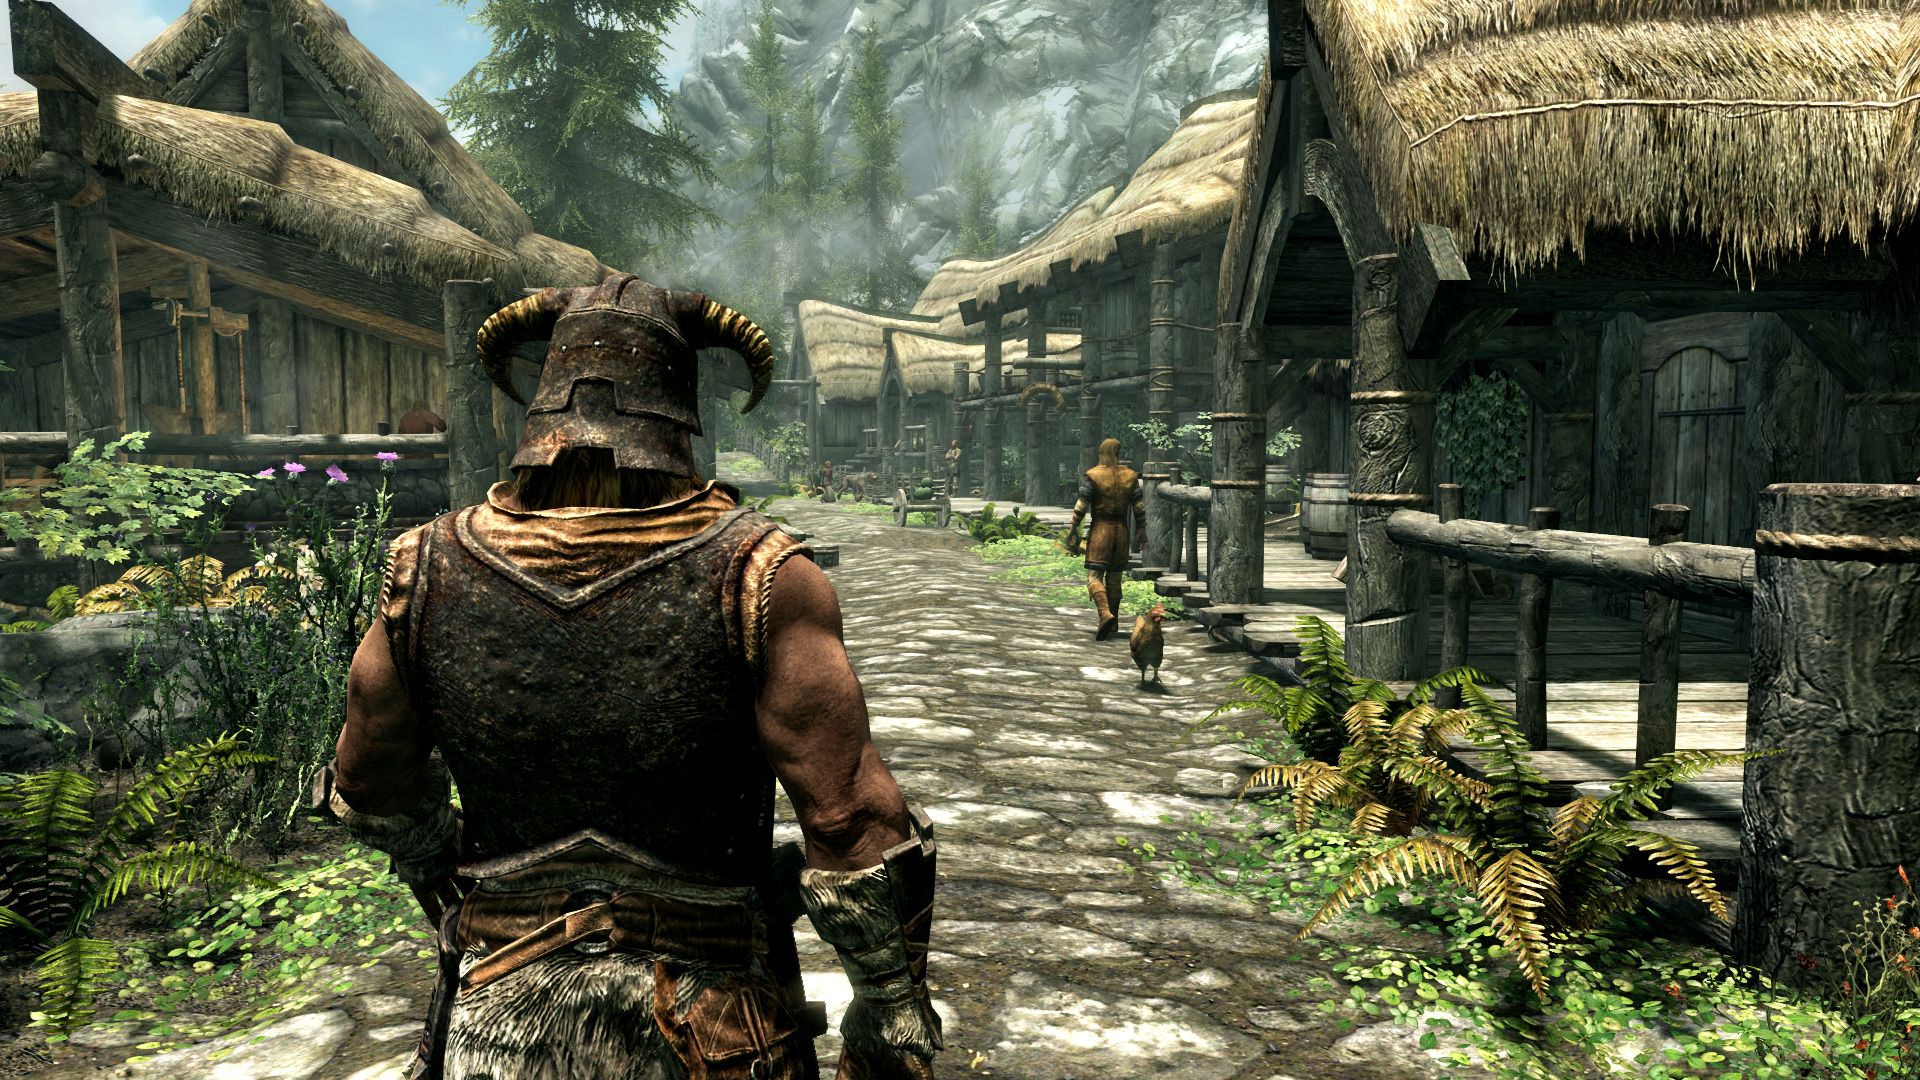 Today, we are going to be covering the Skyrim online co op mod that will be released this week, so you can learn how to enjoy Skyrim with your friends.